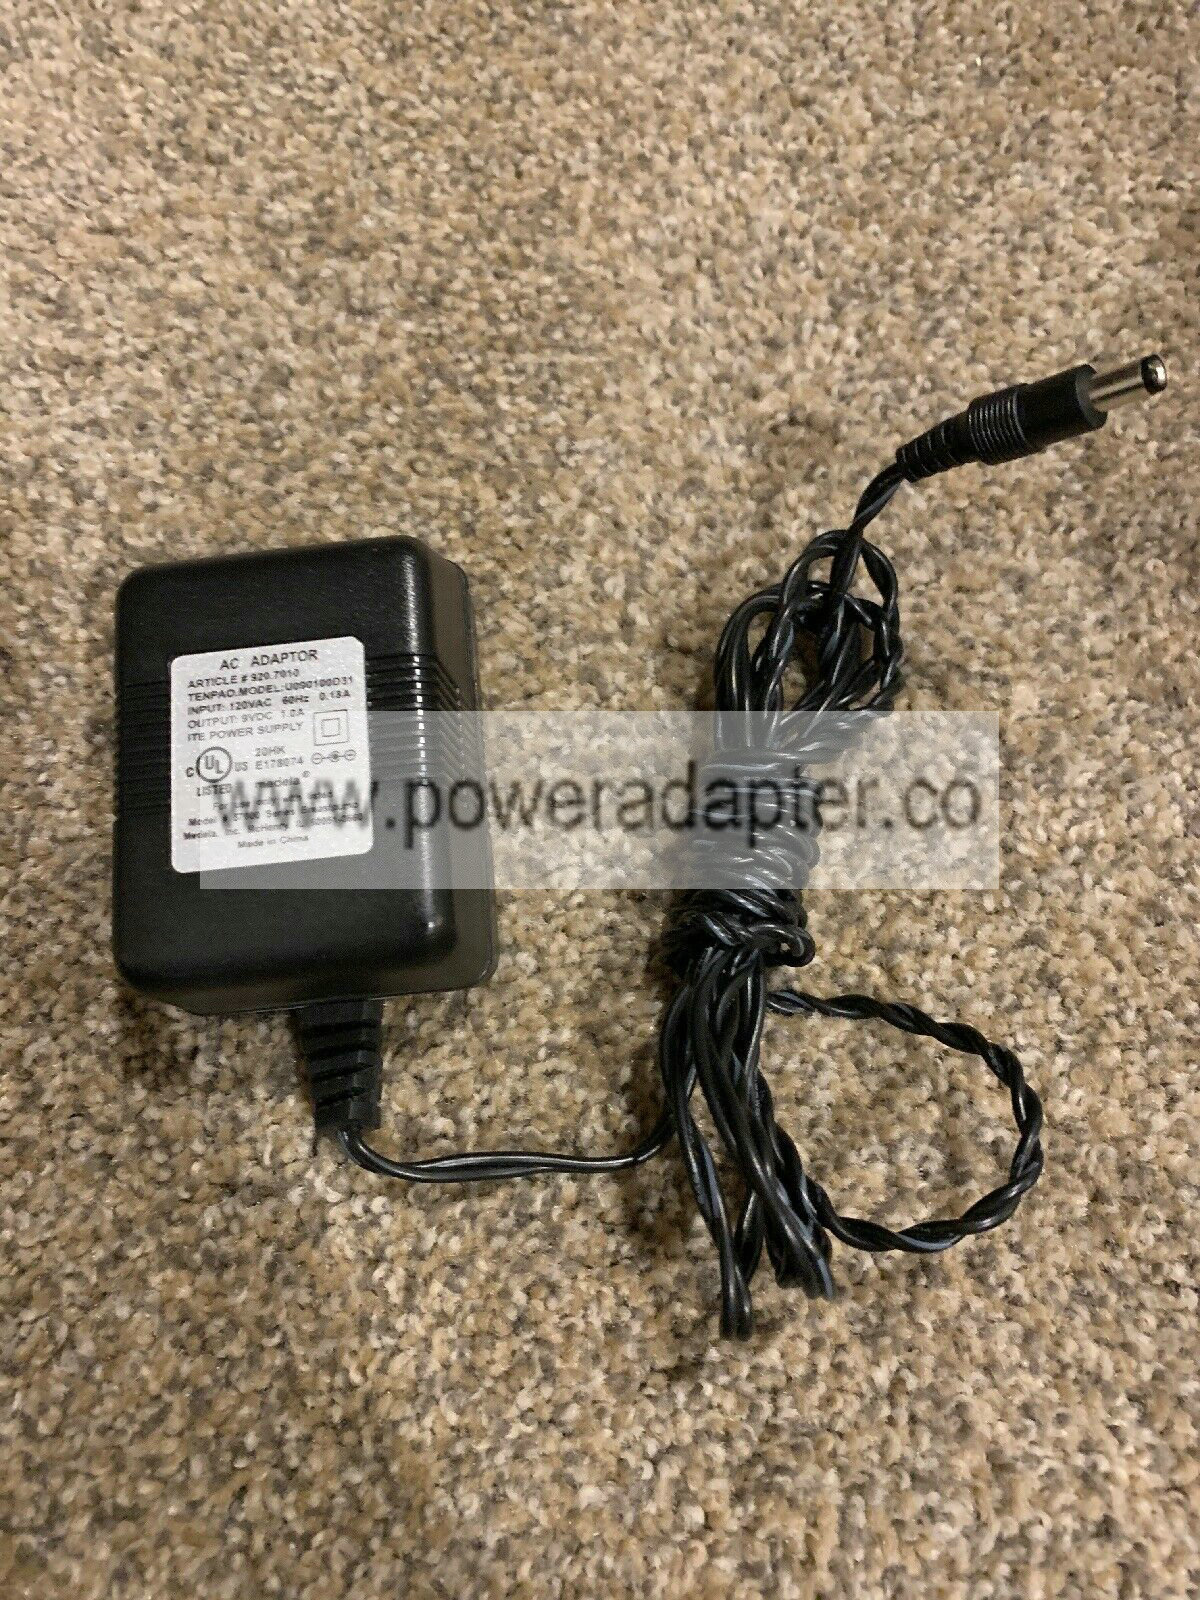 Medela 9207010 U090100D31 AC Adapter Power 9V Part for Breast Pumps Medela 9207010 U090100D31 AC Adapter Power 9V Part - Click Image to Close